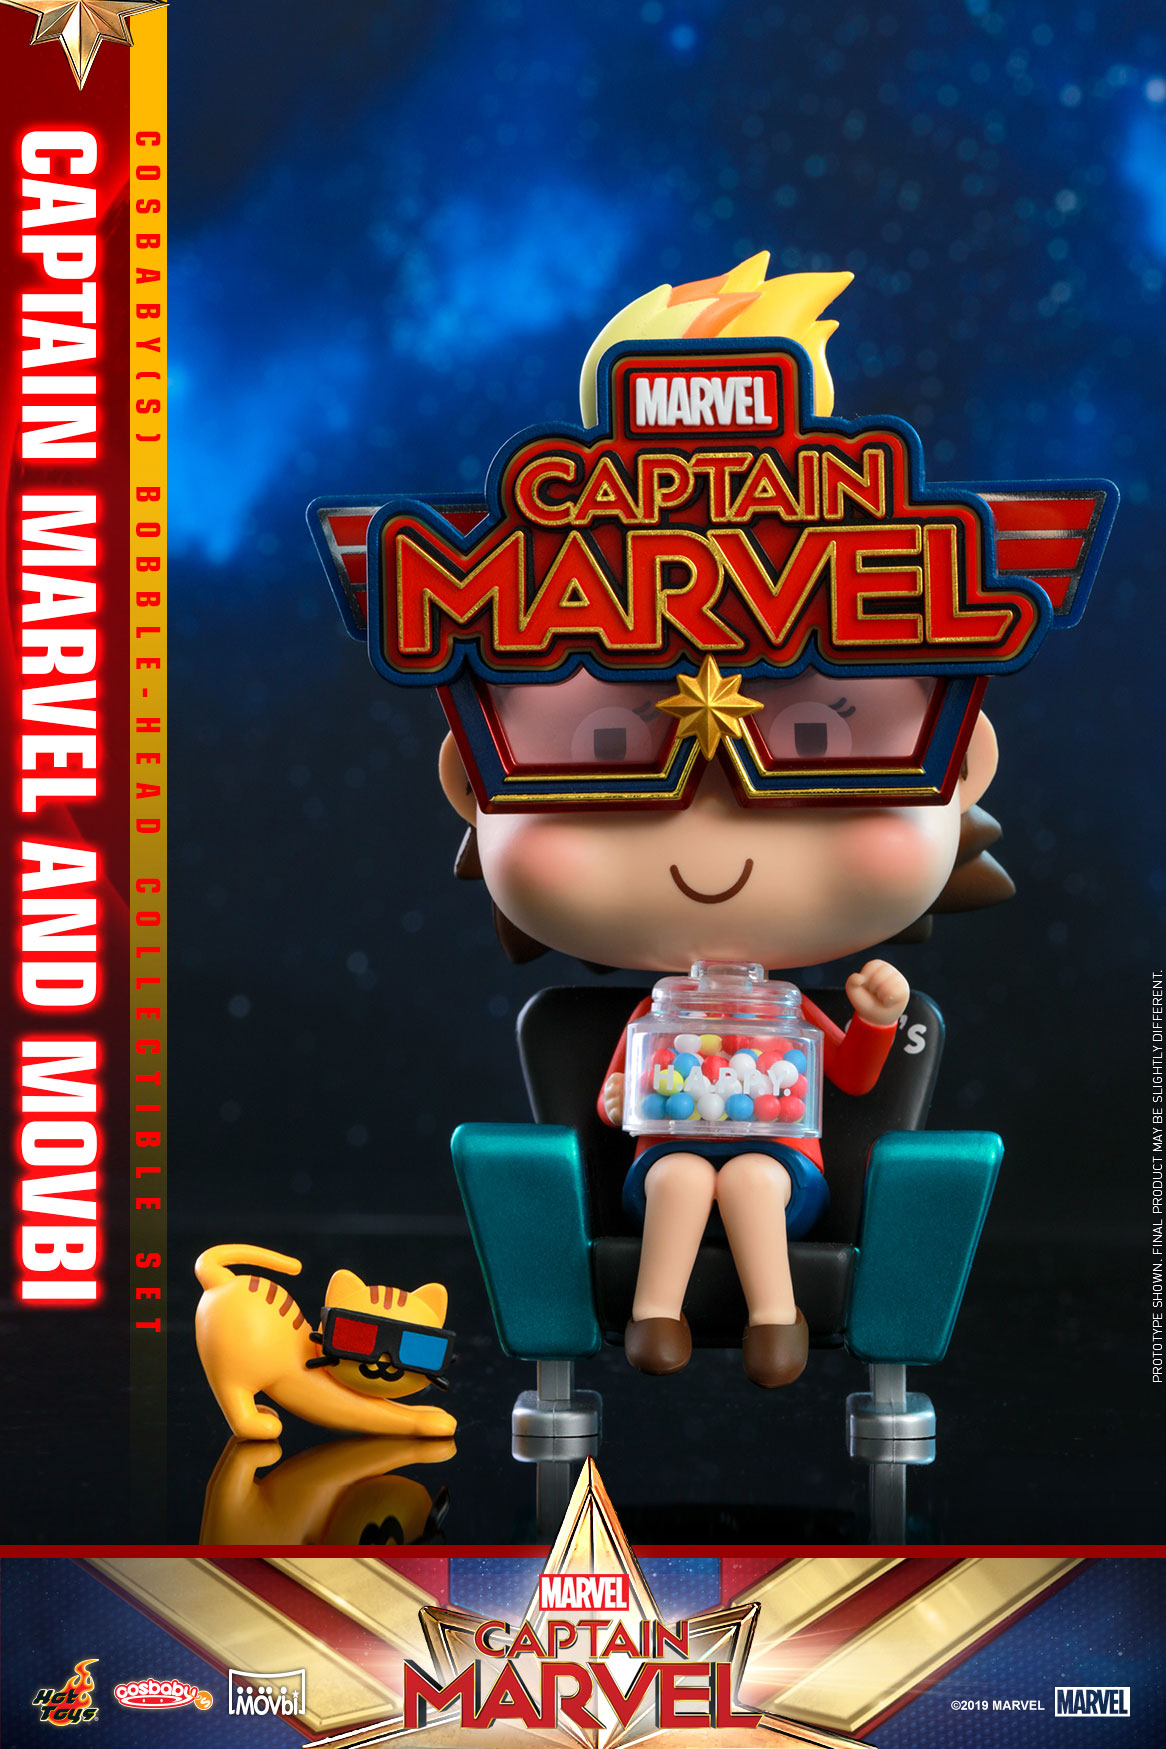 Hot-Toys---Captain-Marvel---Captain-Marvel-and-Movbi-Cosbaby-Bobble-head-Collectible-Set-(S)_PR2